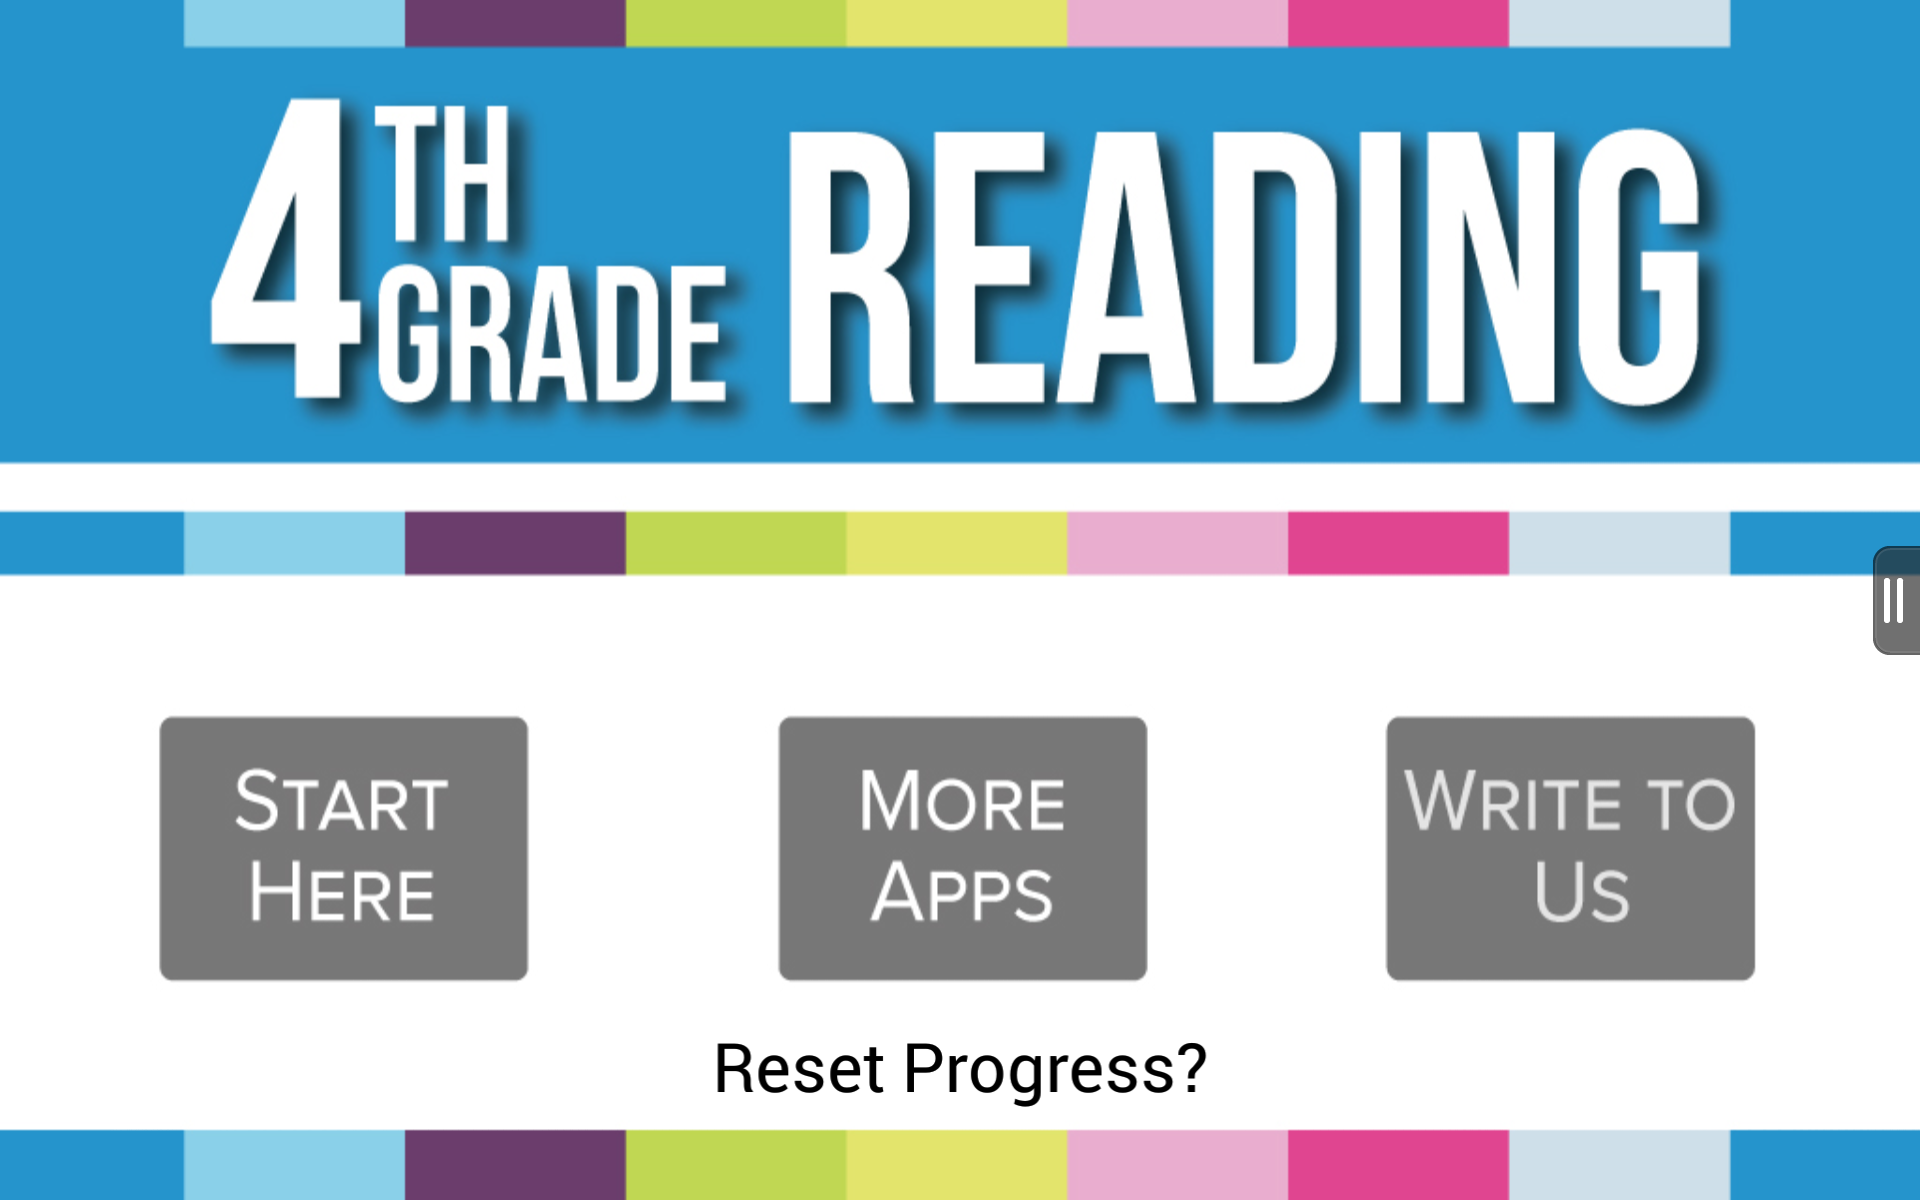 Android application Ultimate 4th Grade Reading screenshort